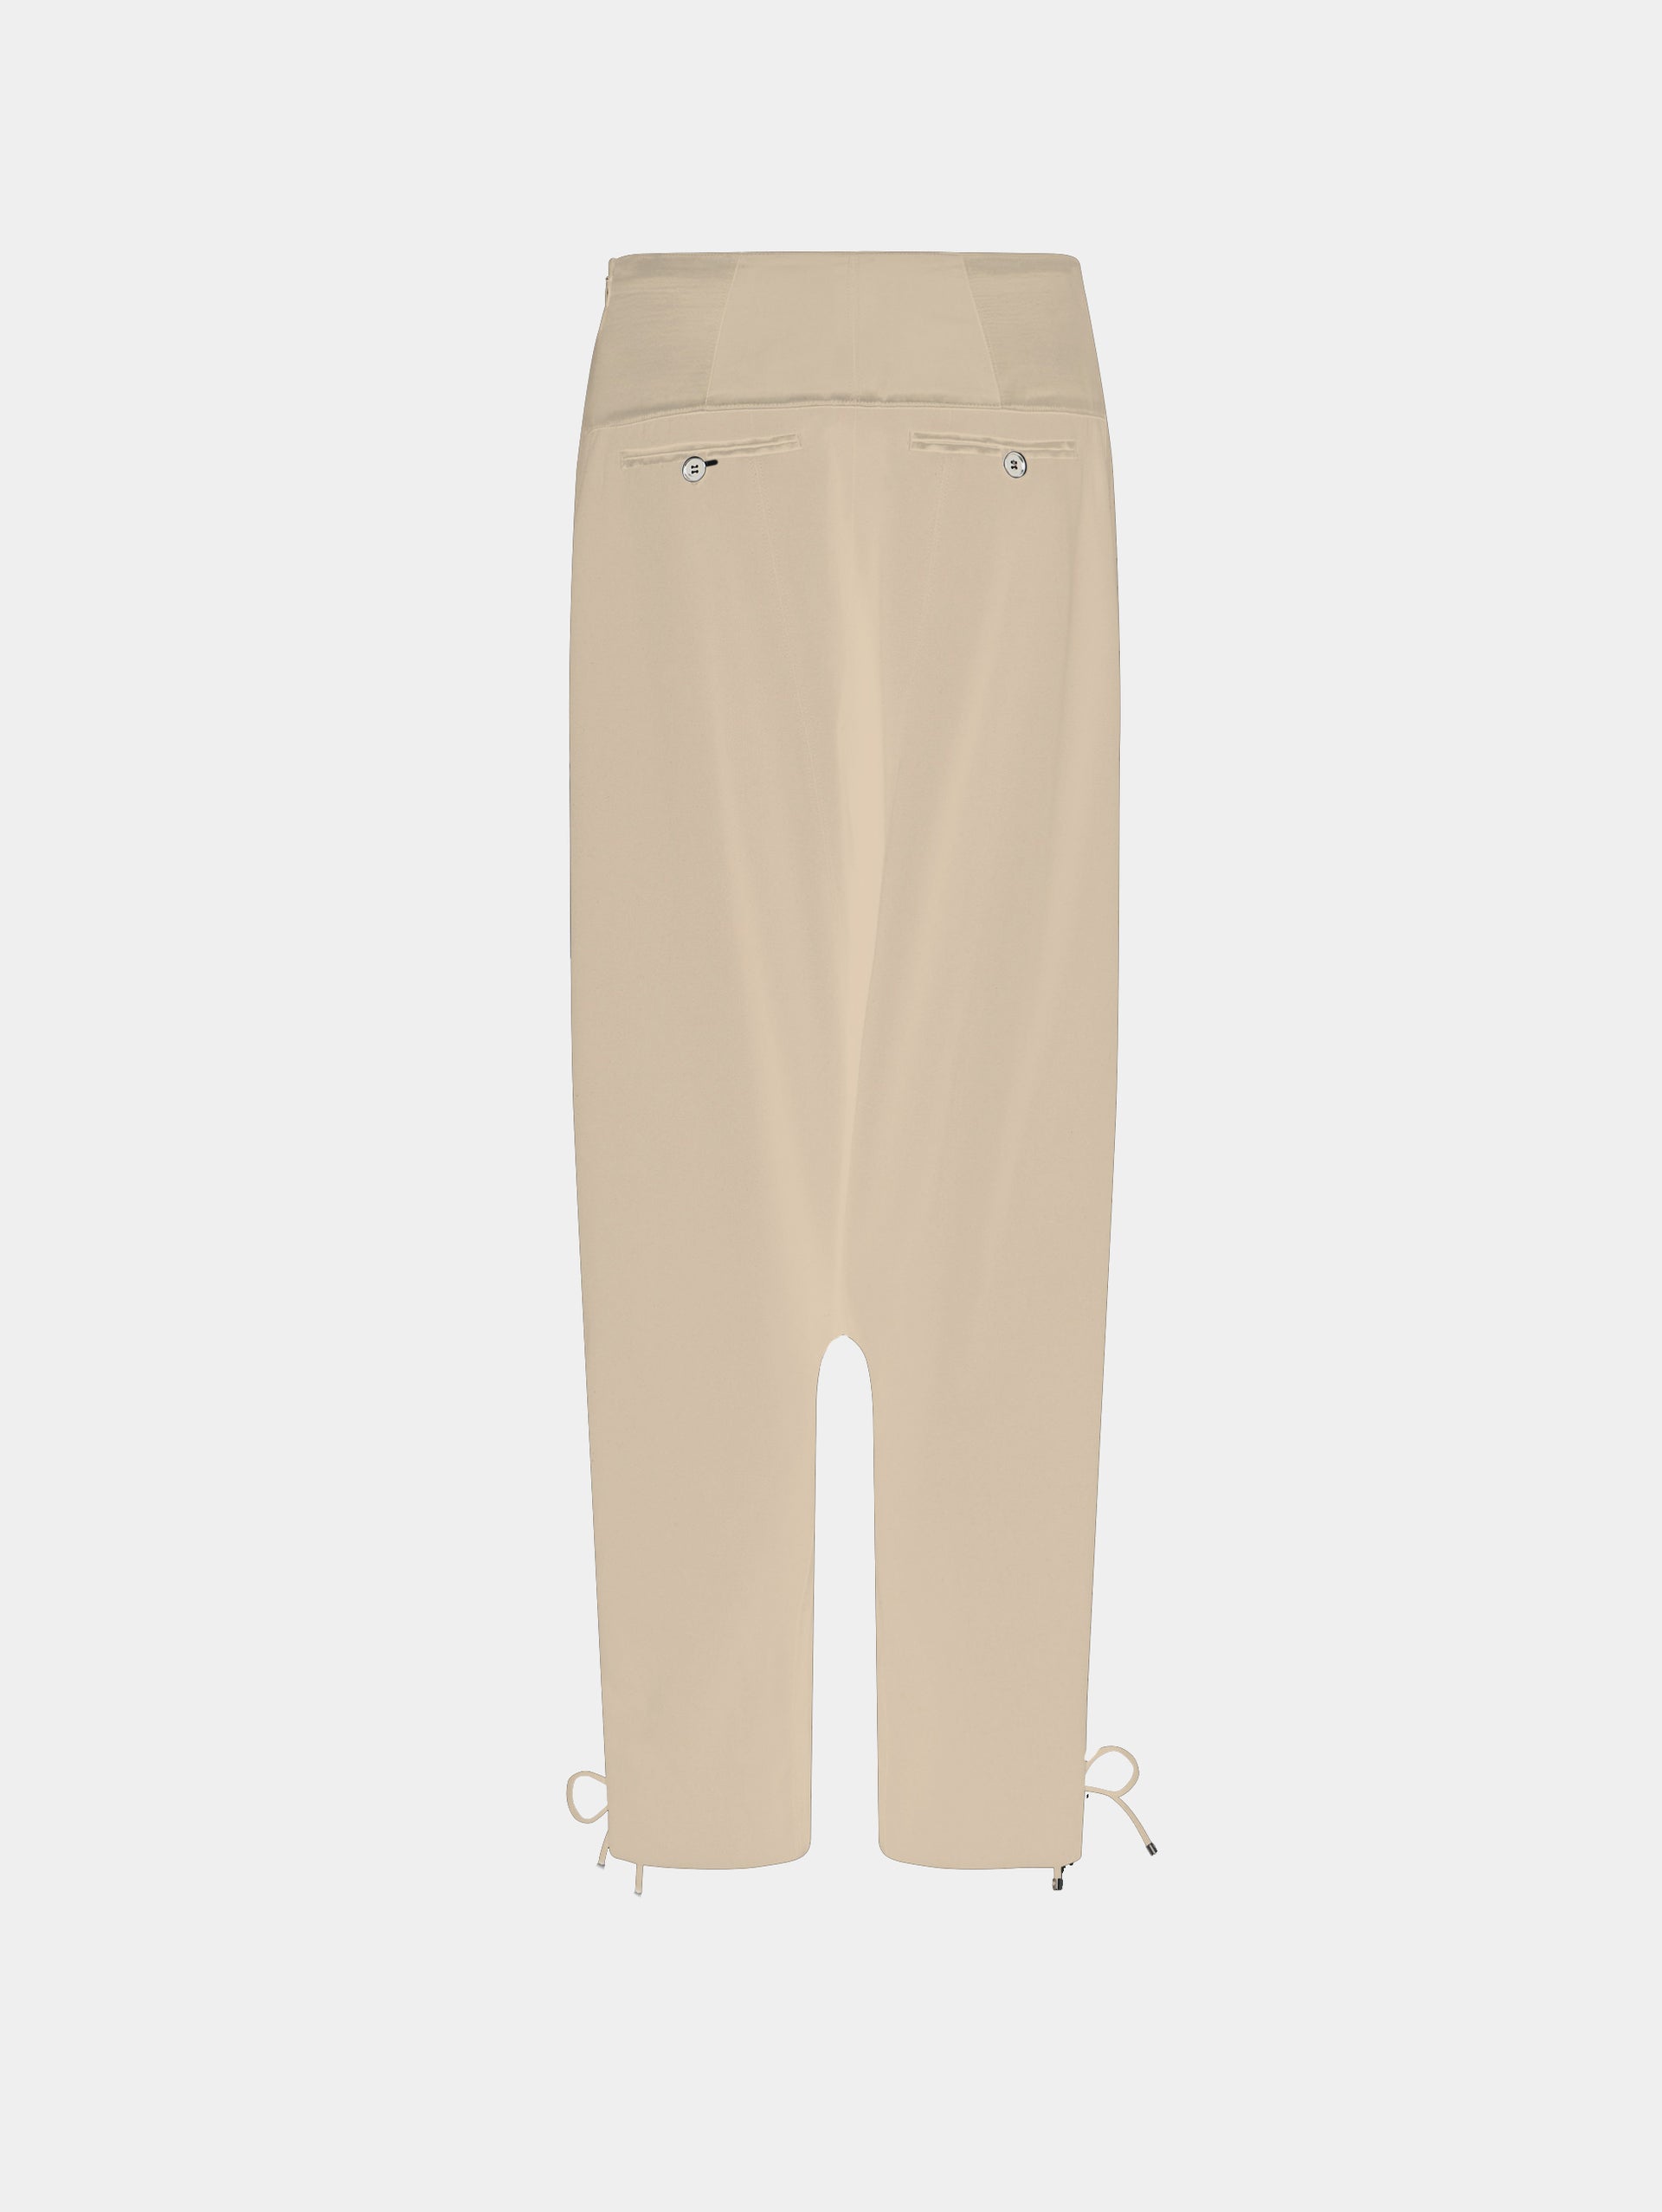 Tailored baggy sand colored pants in wool